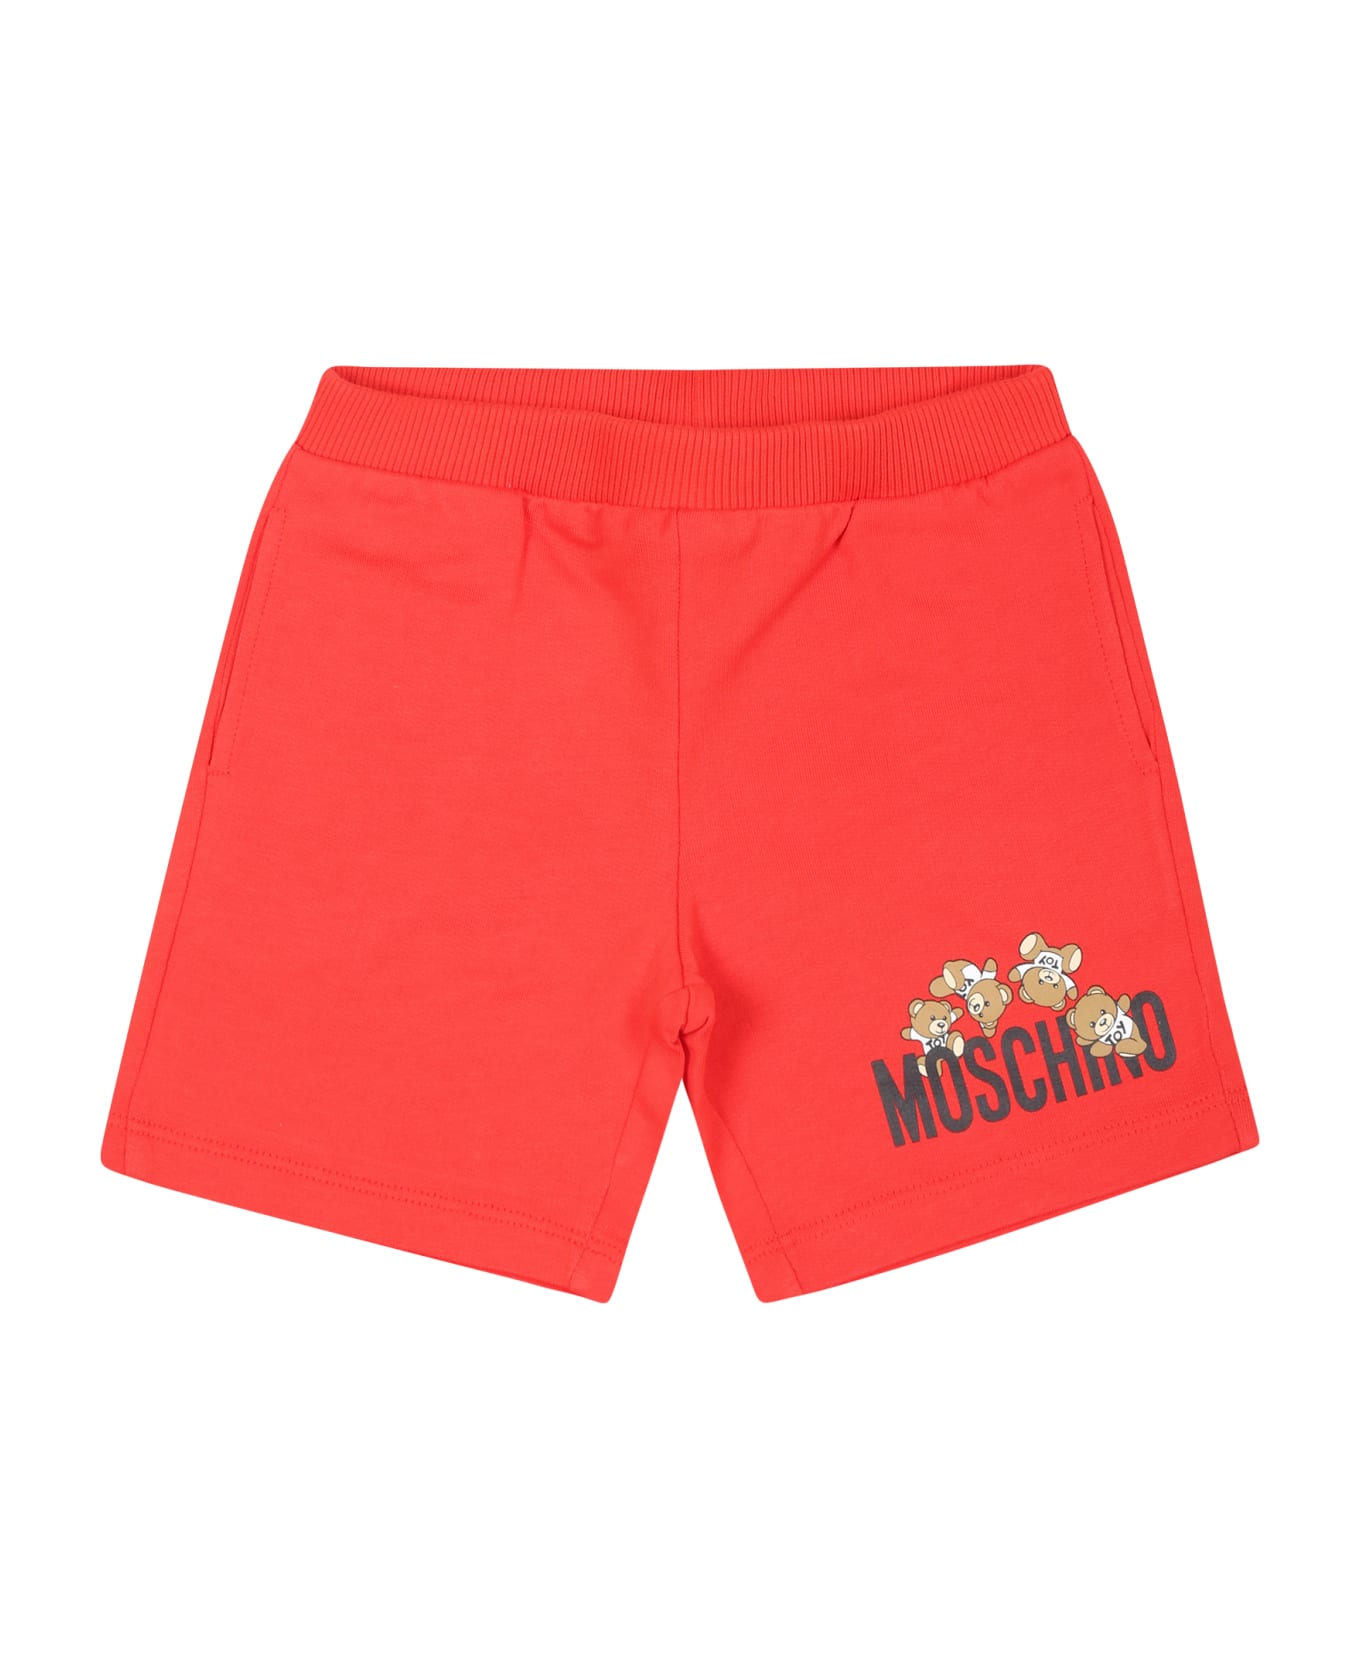 Moschino Red Shorts For Baby Boy With Teddy Bears And Logo - Red ボトムス